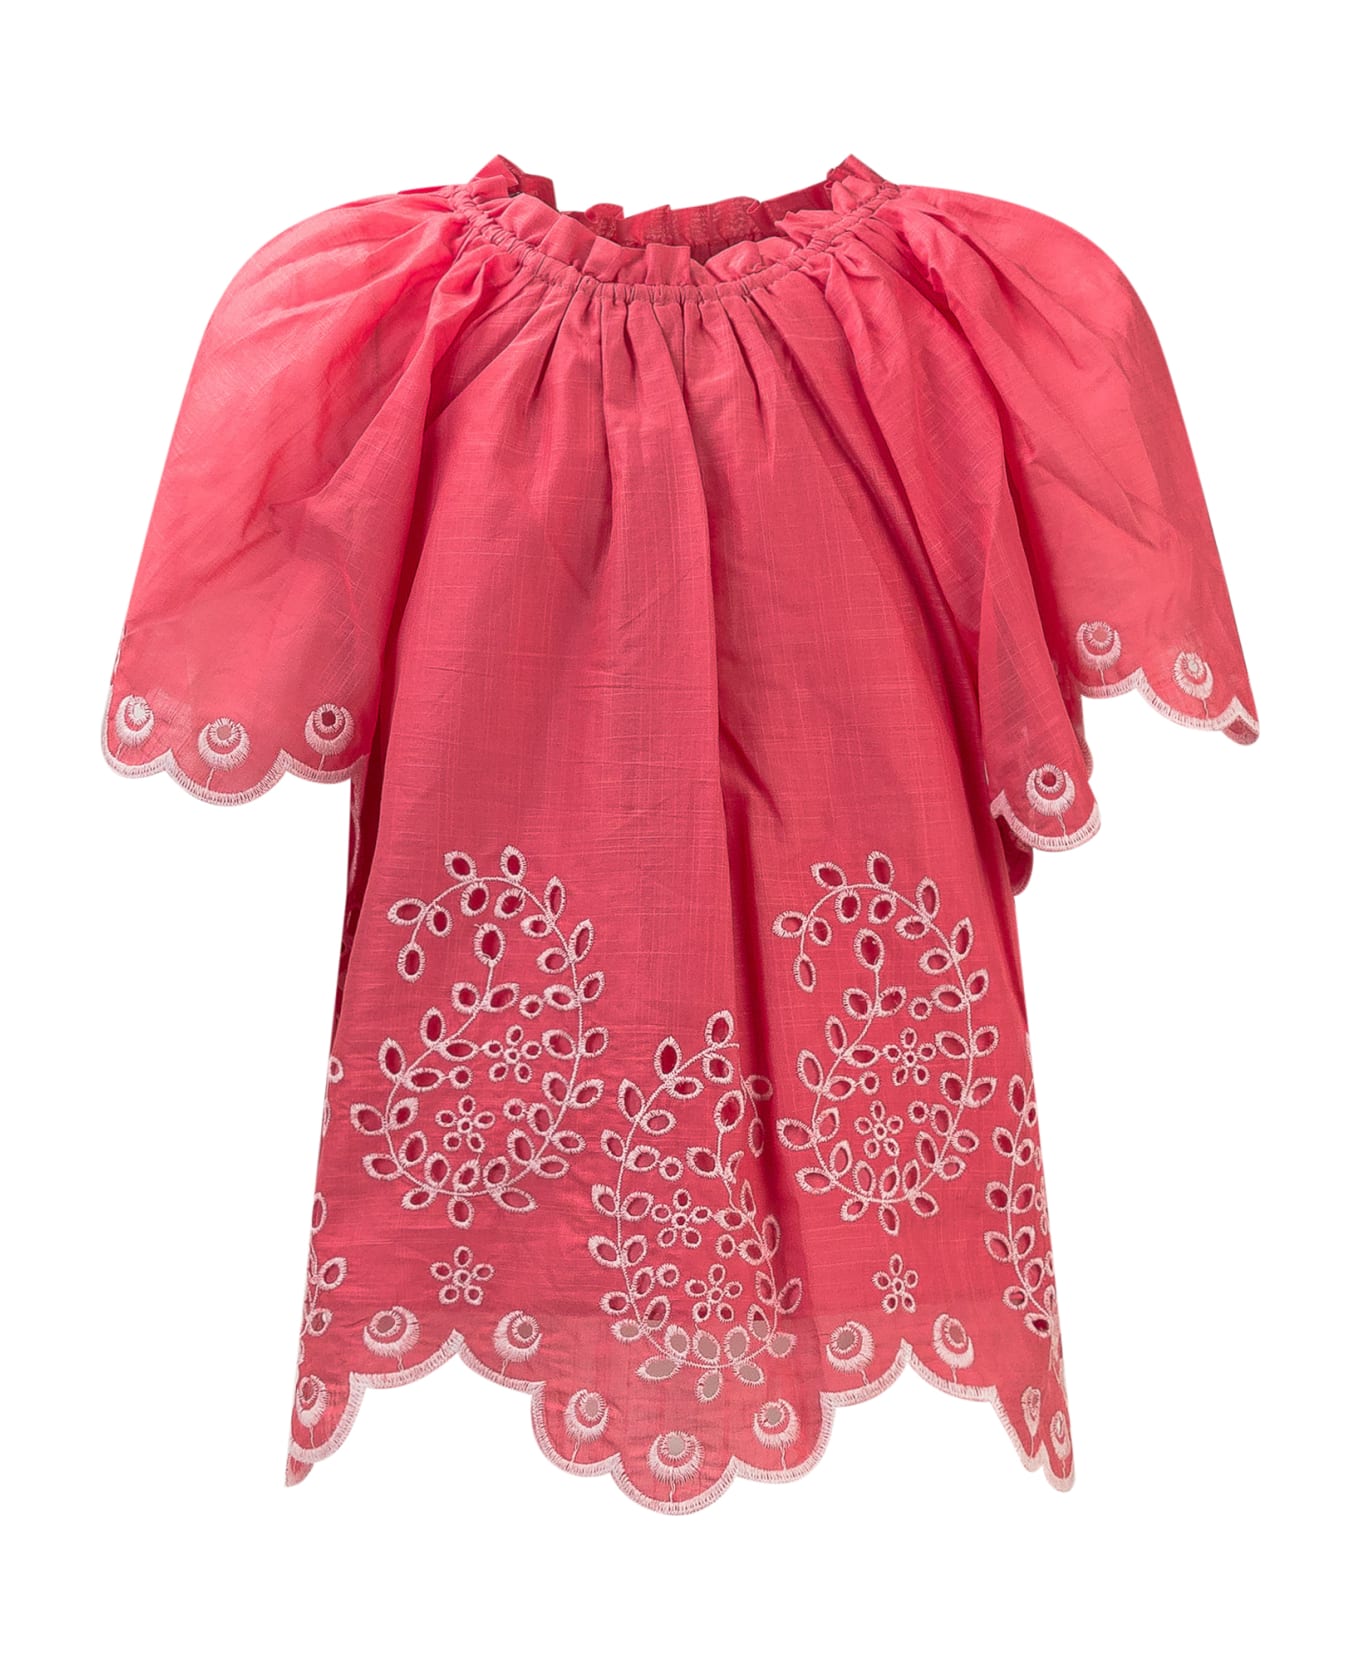 Zimmermann Paisley Top - CORAL PINK